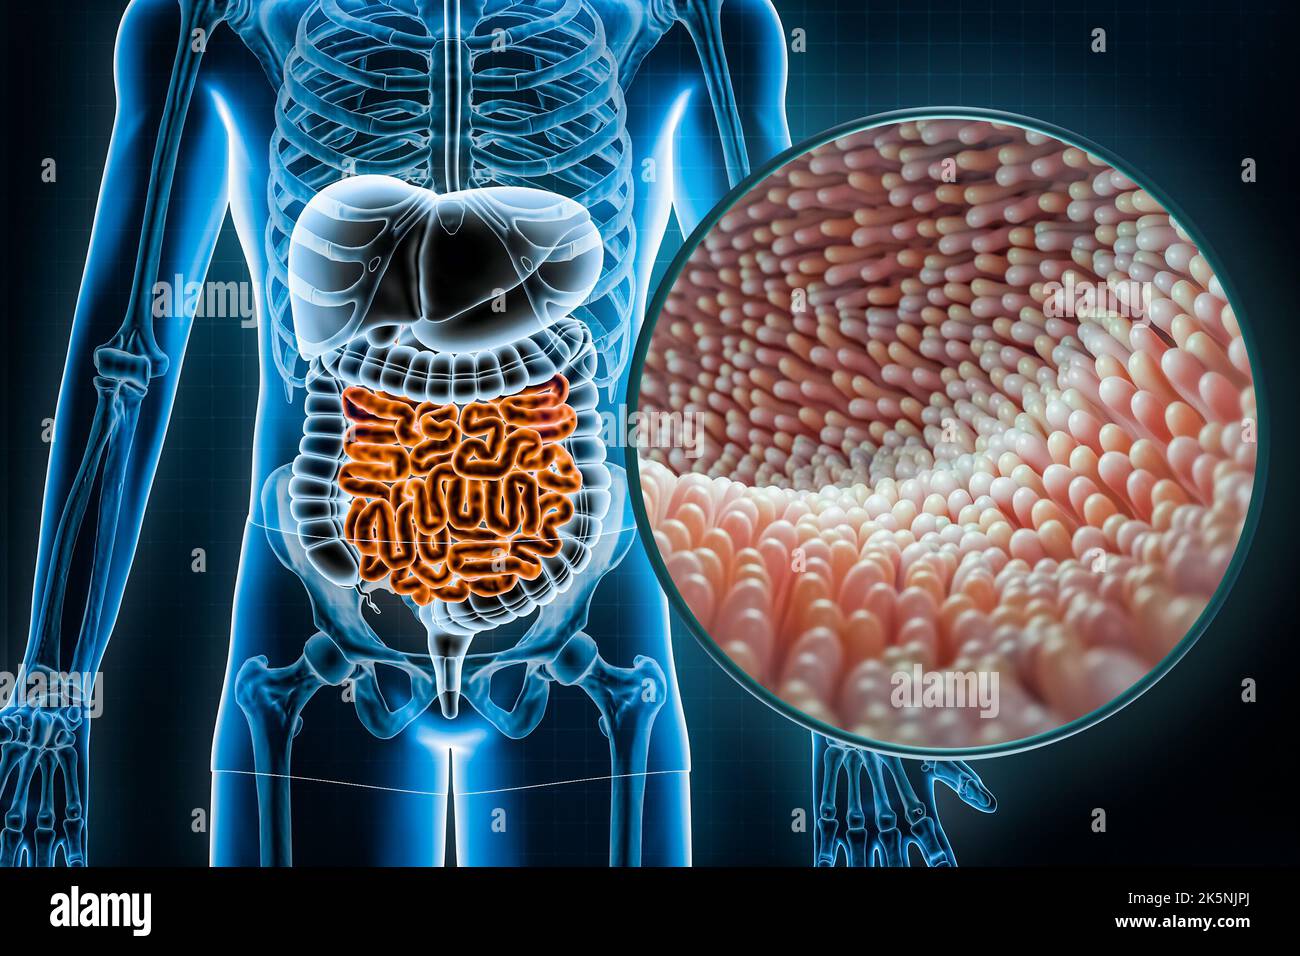 Human digestive system and gastrointestinal tract with microvilli of the small intestine or bowel 3D rendering illustration. Anatomy, medical, biology Stock Photo